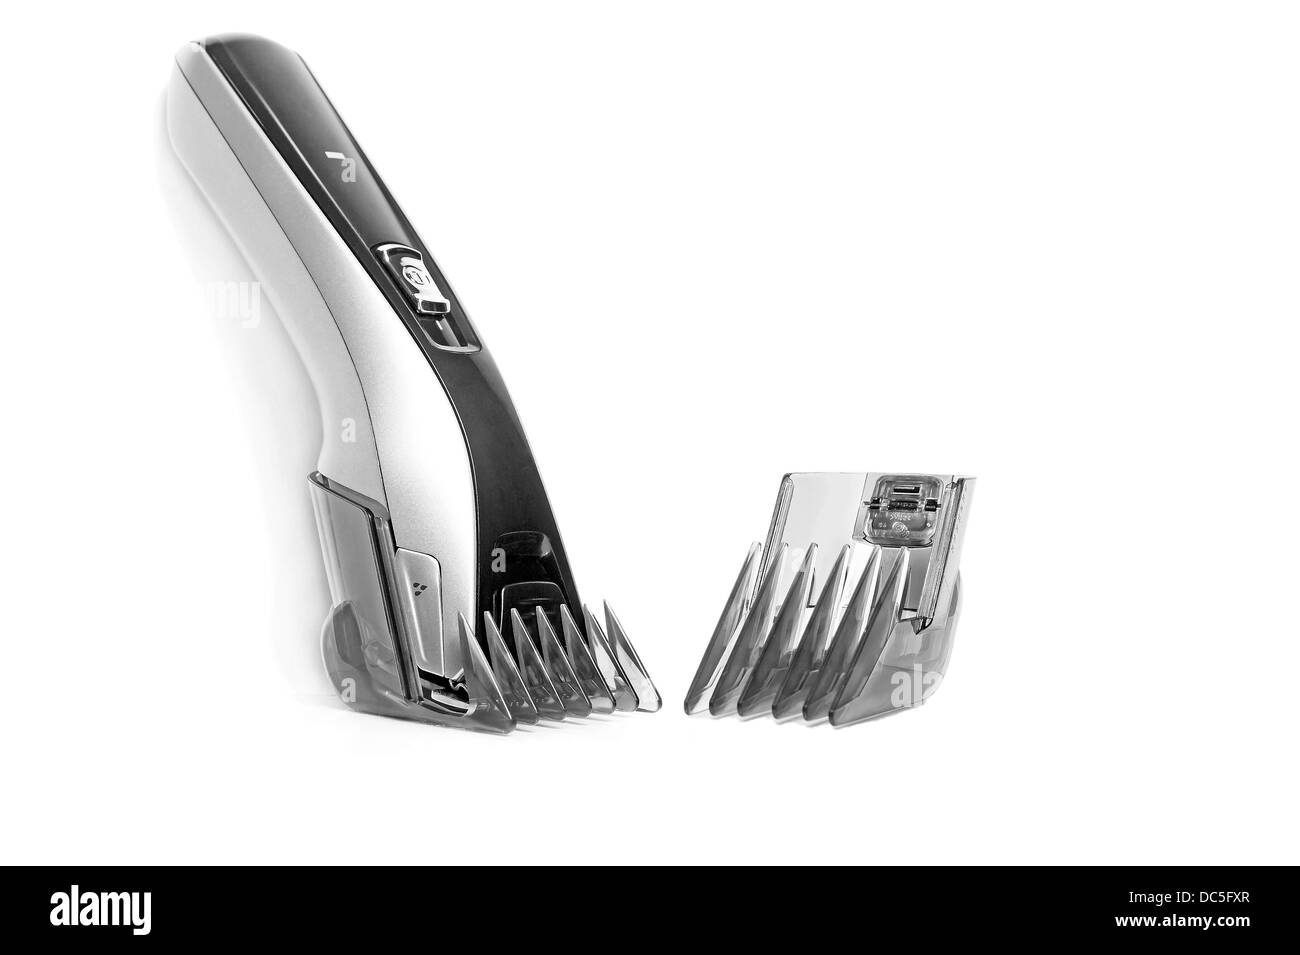 cordless clipper is on a white background Stock Photo